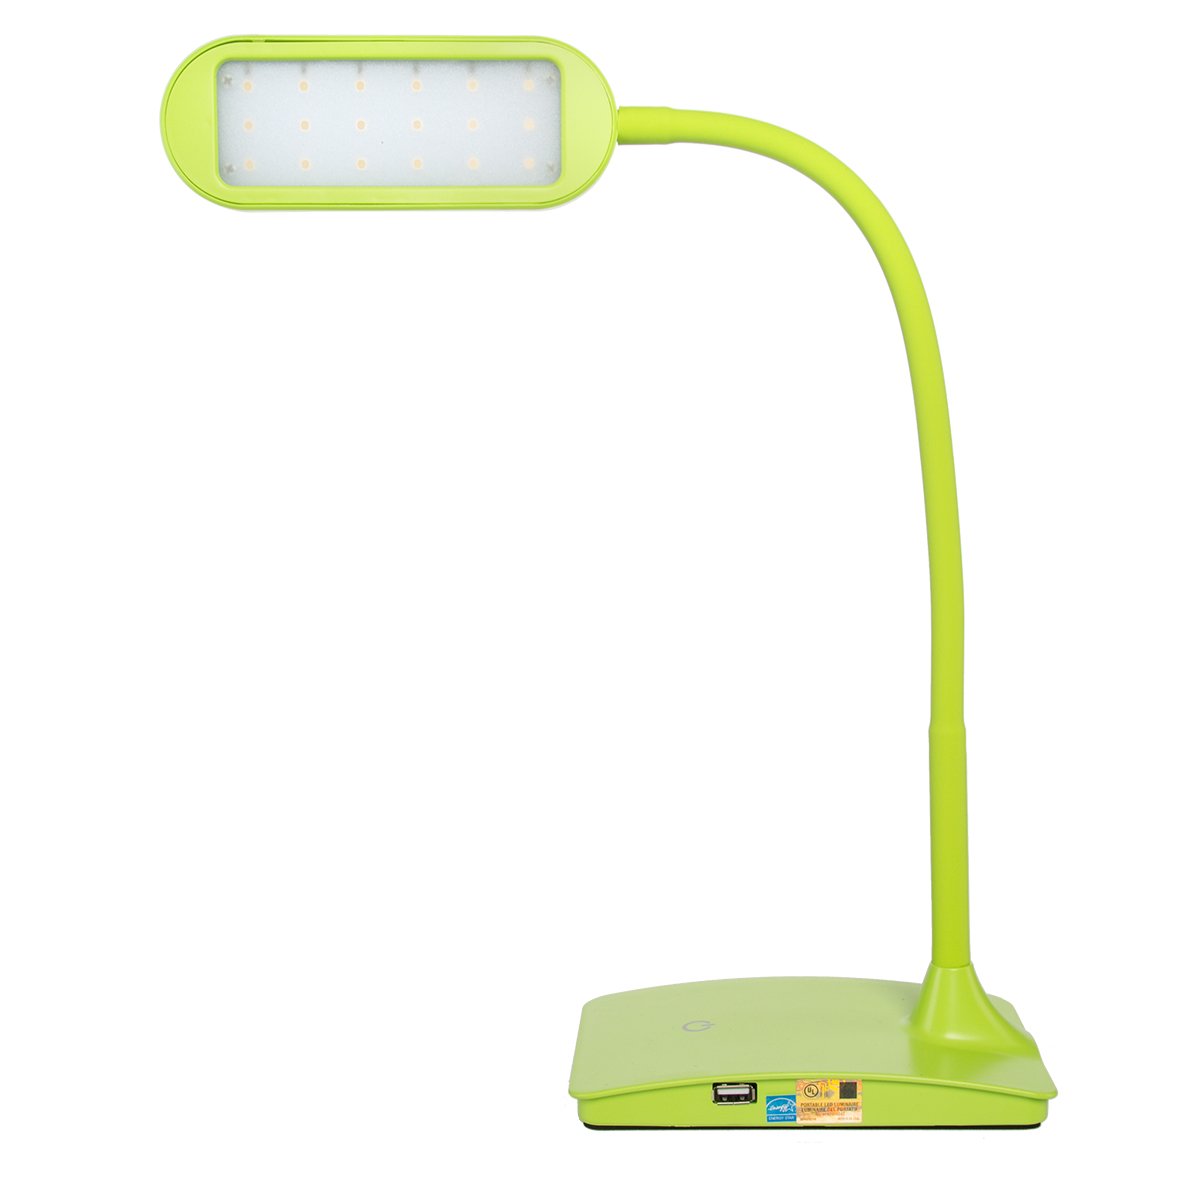 TW Lighting IVY LED Desk Lamp with USB Port 3-Way Touch Switch, 